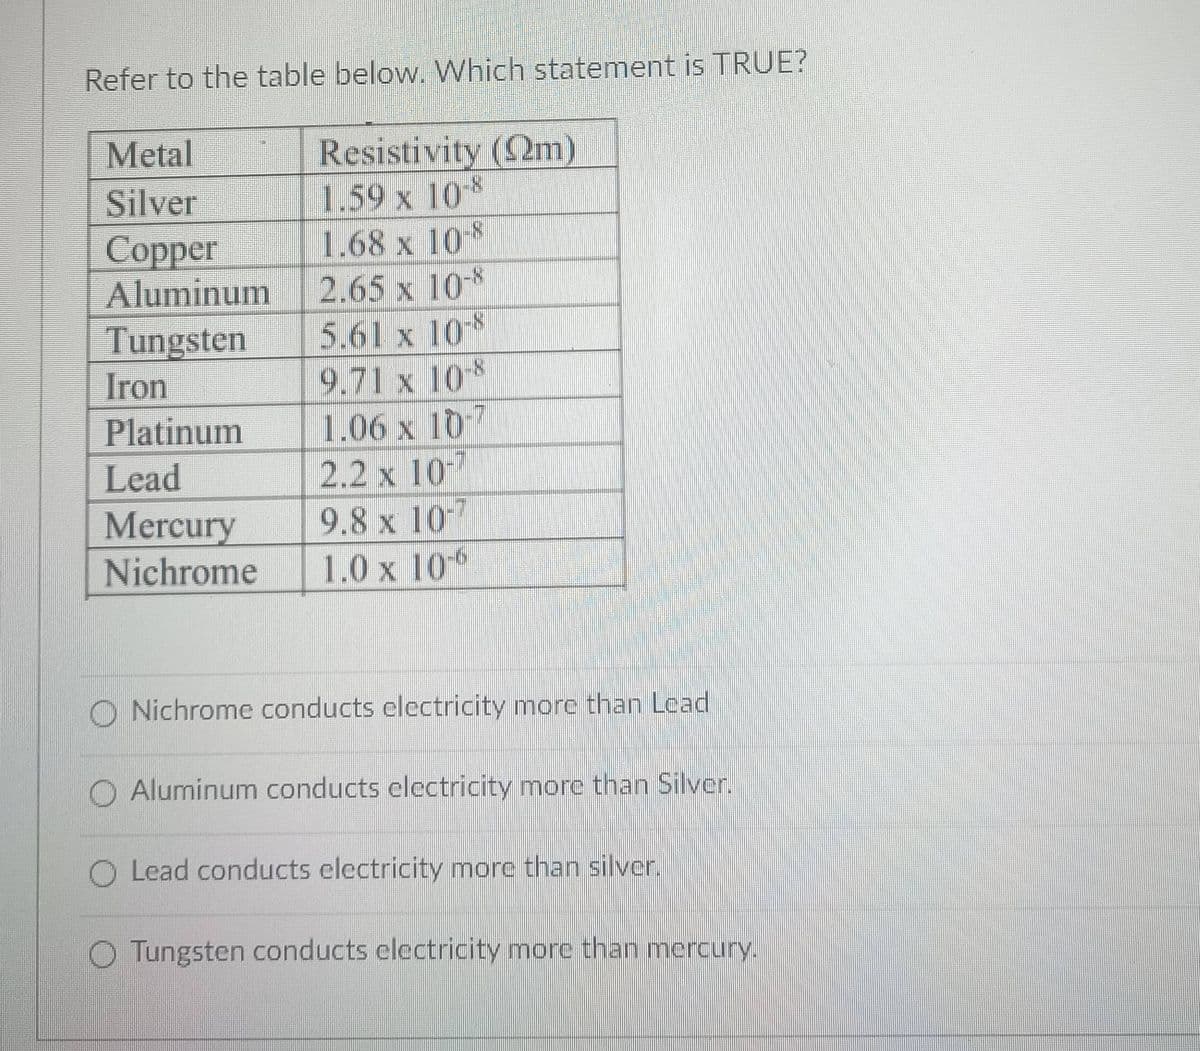 Refer to the table below. Which statement is TRUE?
Metal
Silver
Соpper
Aluminum
Tungsten
Iron
Platinum
Lead
Resistivity (2m)
1.59 x 10
1.68 x 10*
2.65 x 10*
5.61 x 10*
9.71 x 10*
1.06 x 107
2.2 x 10
9.8 x 107
1.0 x 10
Mercury
Nichrome
Nichrome conducts electricity more than Lead
Aluminum conducts electricity more than Silver.
Lead conducts electricity more than silver.
O Tungsten conducts electricity more than mercury.
